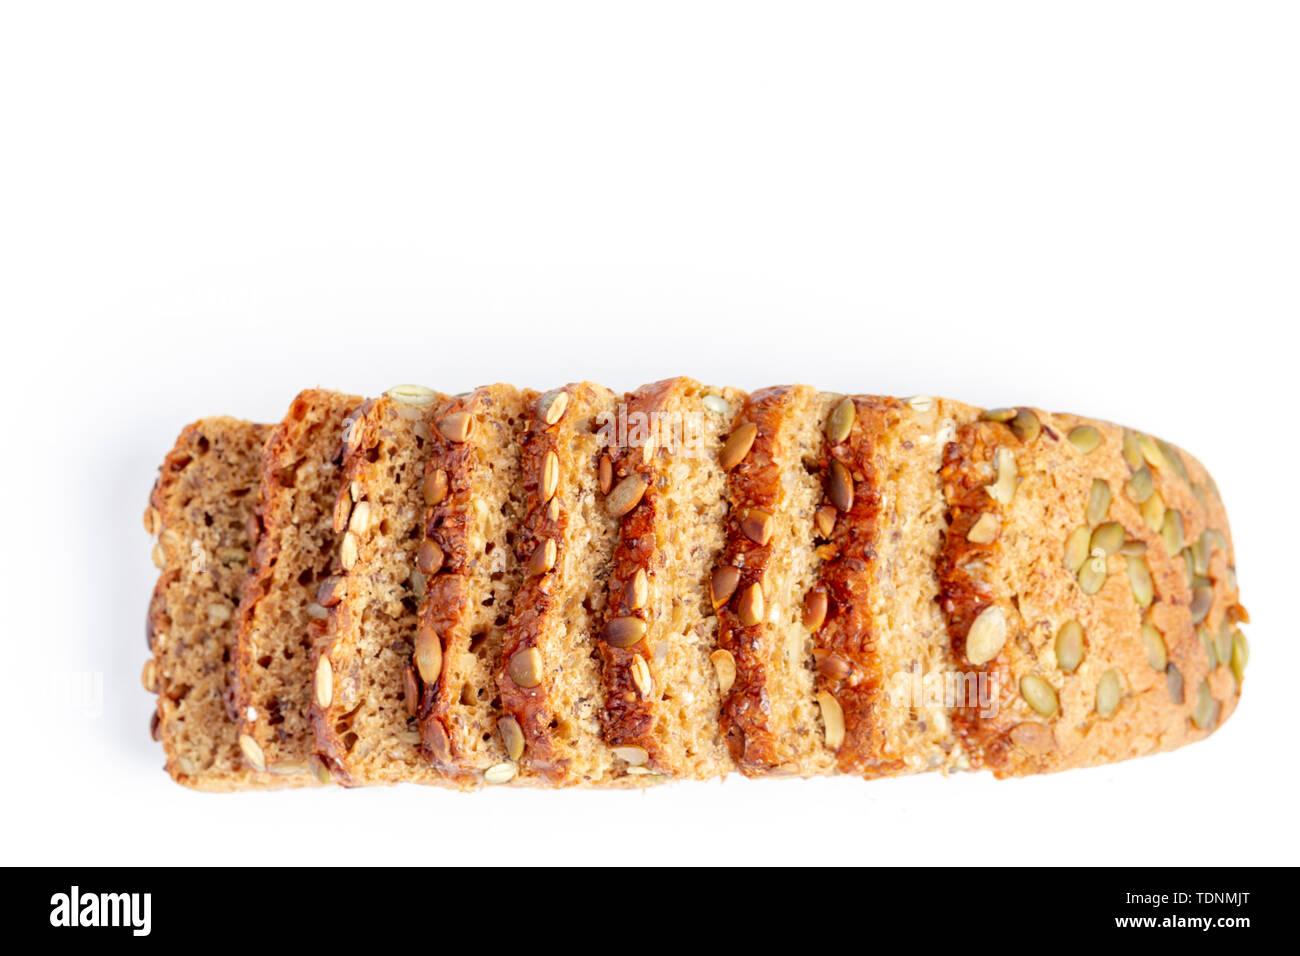 Slice of multigrain bread with sunflower and pumpkin seeds and flax seed on a white background Stock Photo